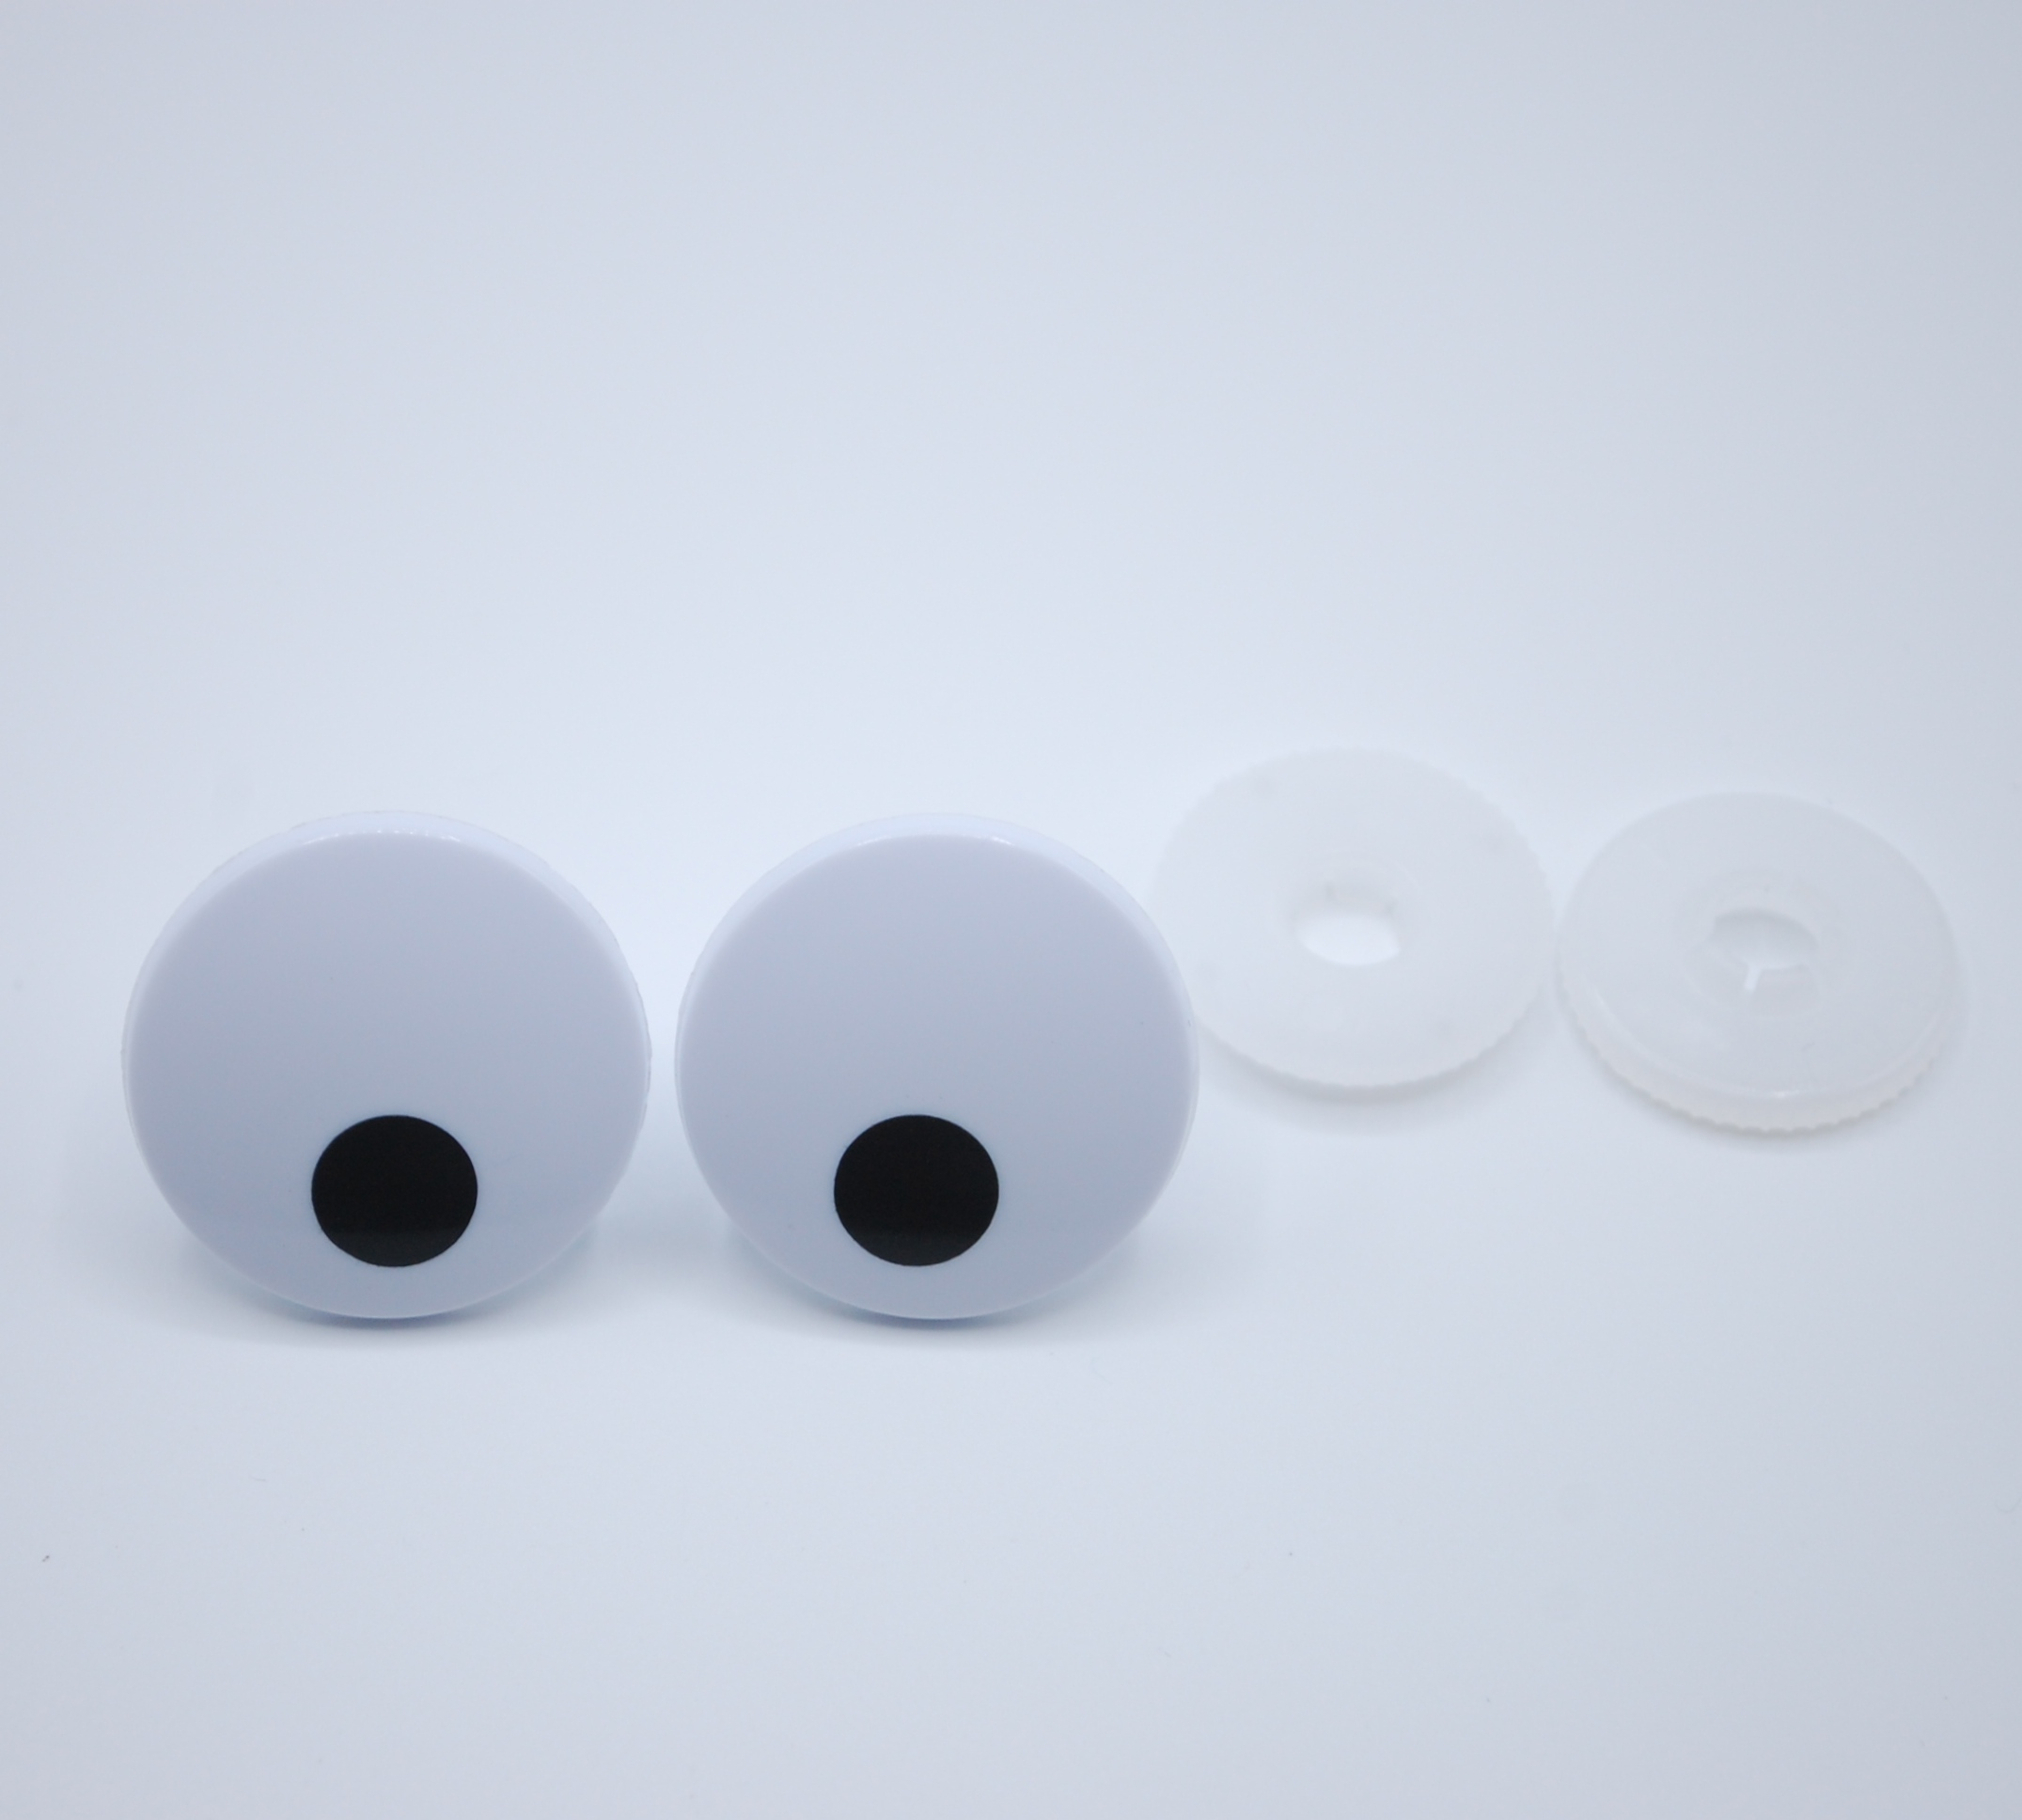 12mm Pale Gray Safety Eyes - 5 Pairs